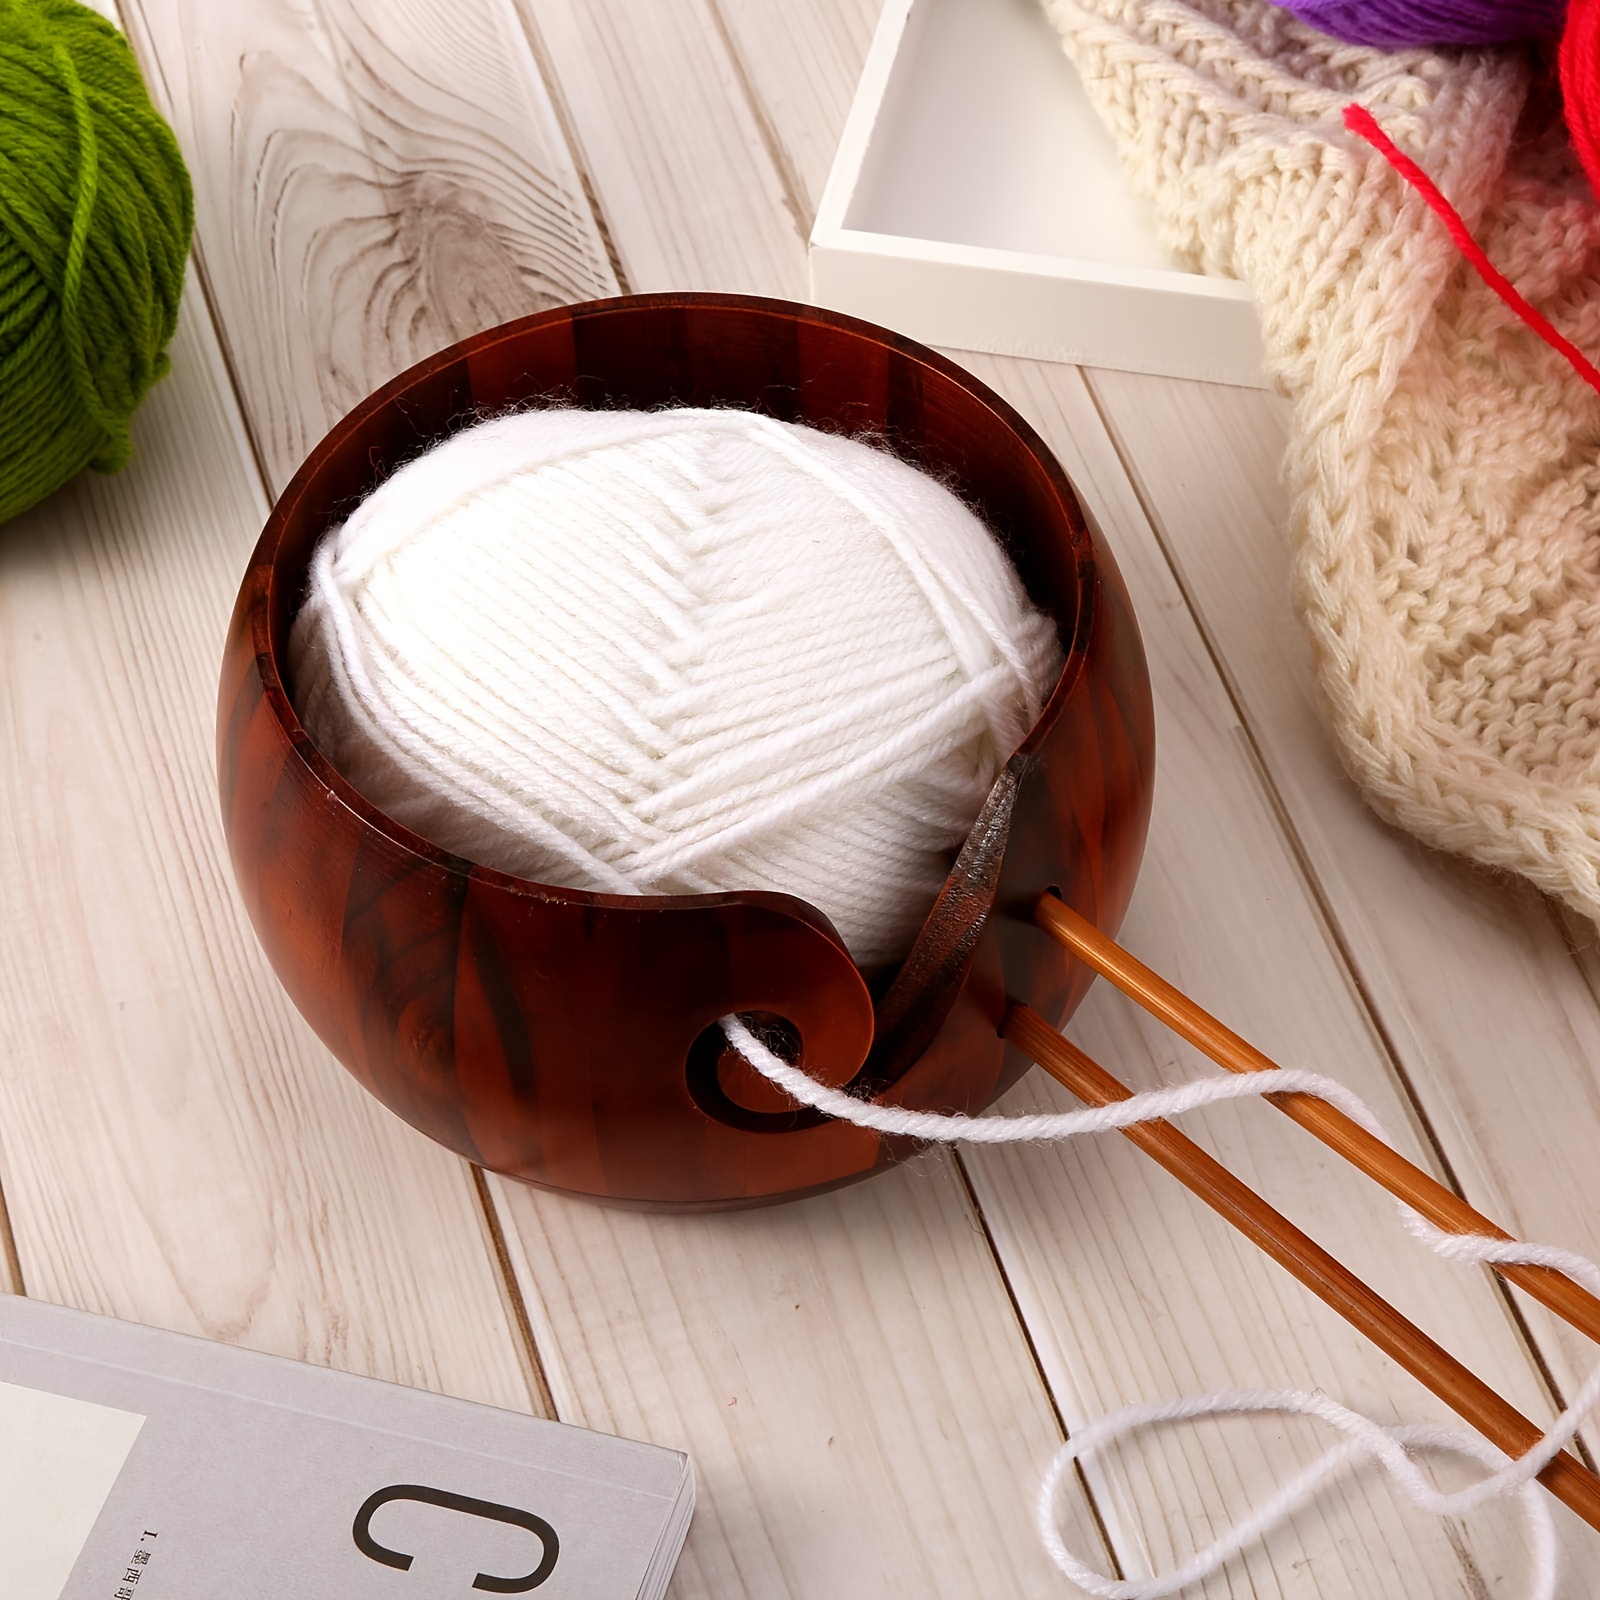 beiyoule Bamboo Yarn Bowl,Handmade Knitting Bowl Wool Holder,DIY Natural  Embroidery Crocheting Storage Accessories for Crochet Home Decor Wine Red